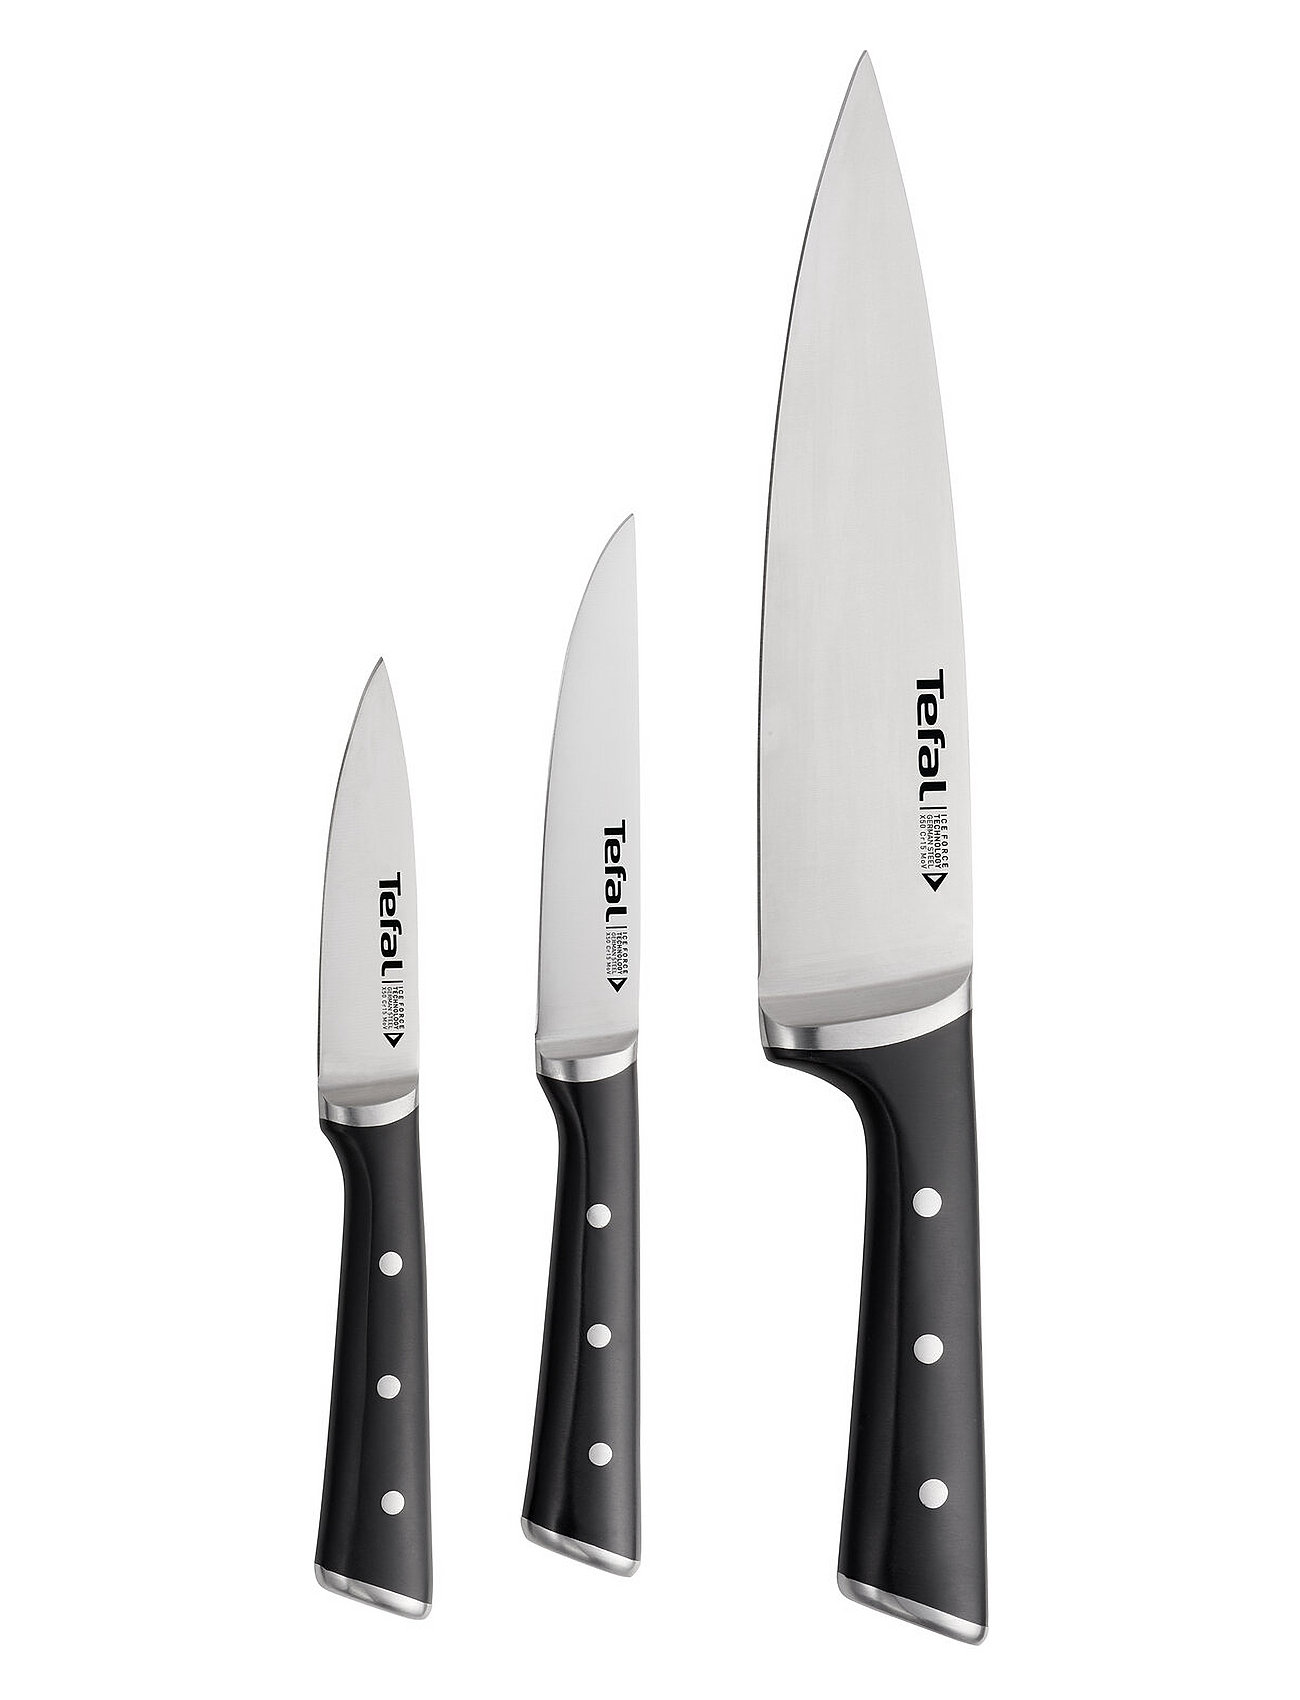 Tefal Ice Force Set 3pcs knife Chef knives Pairing-, Knife kitchen – & Utility-, accessories –